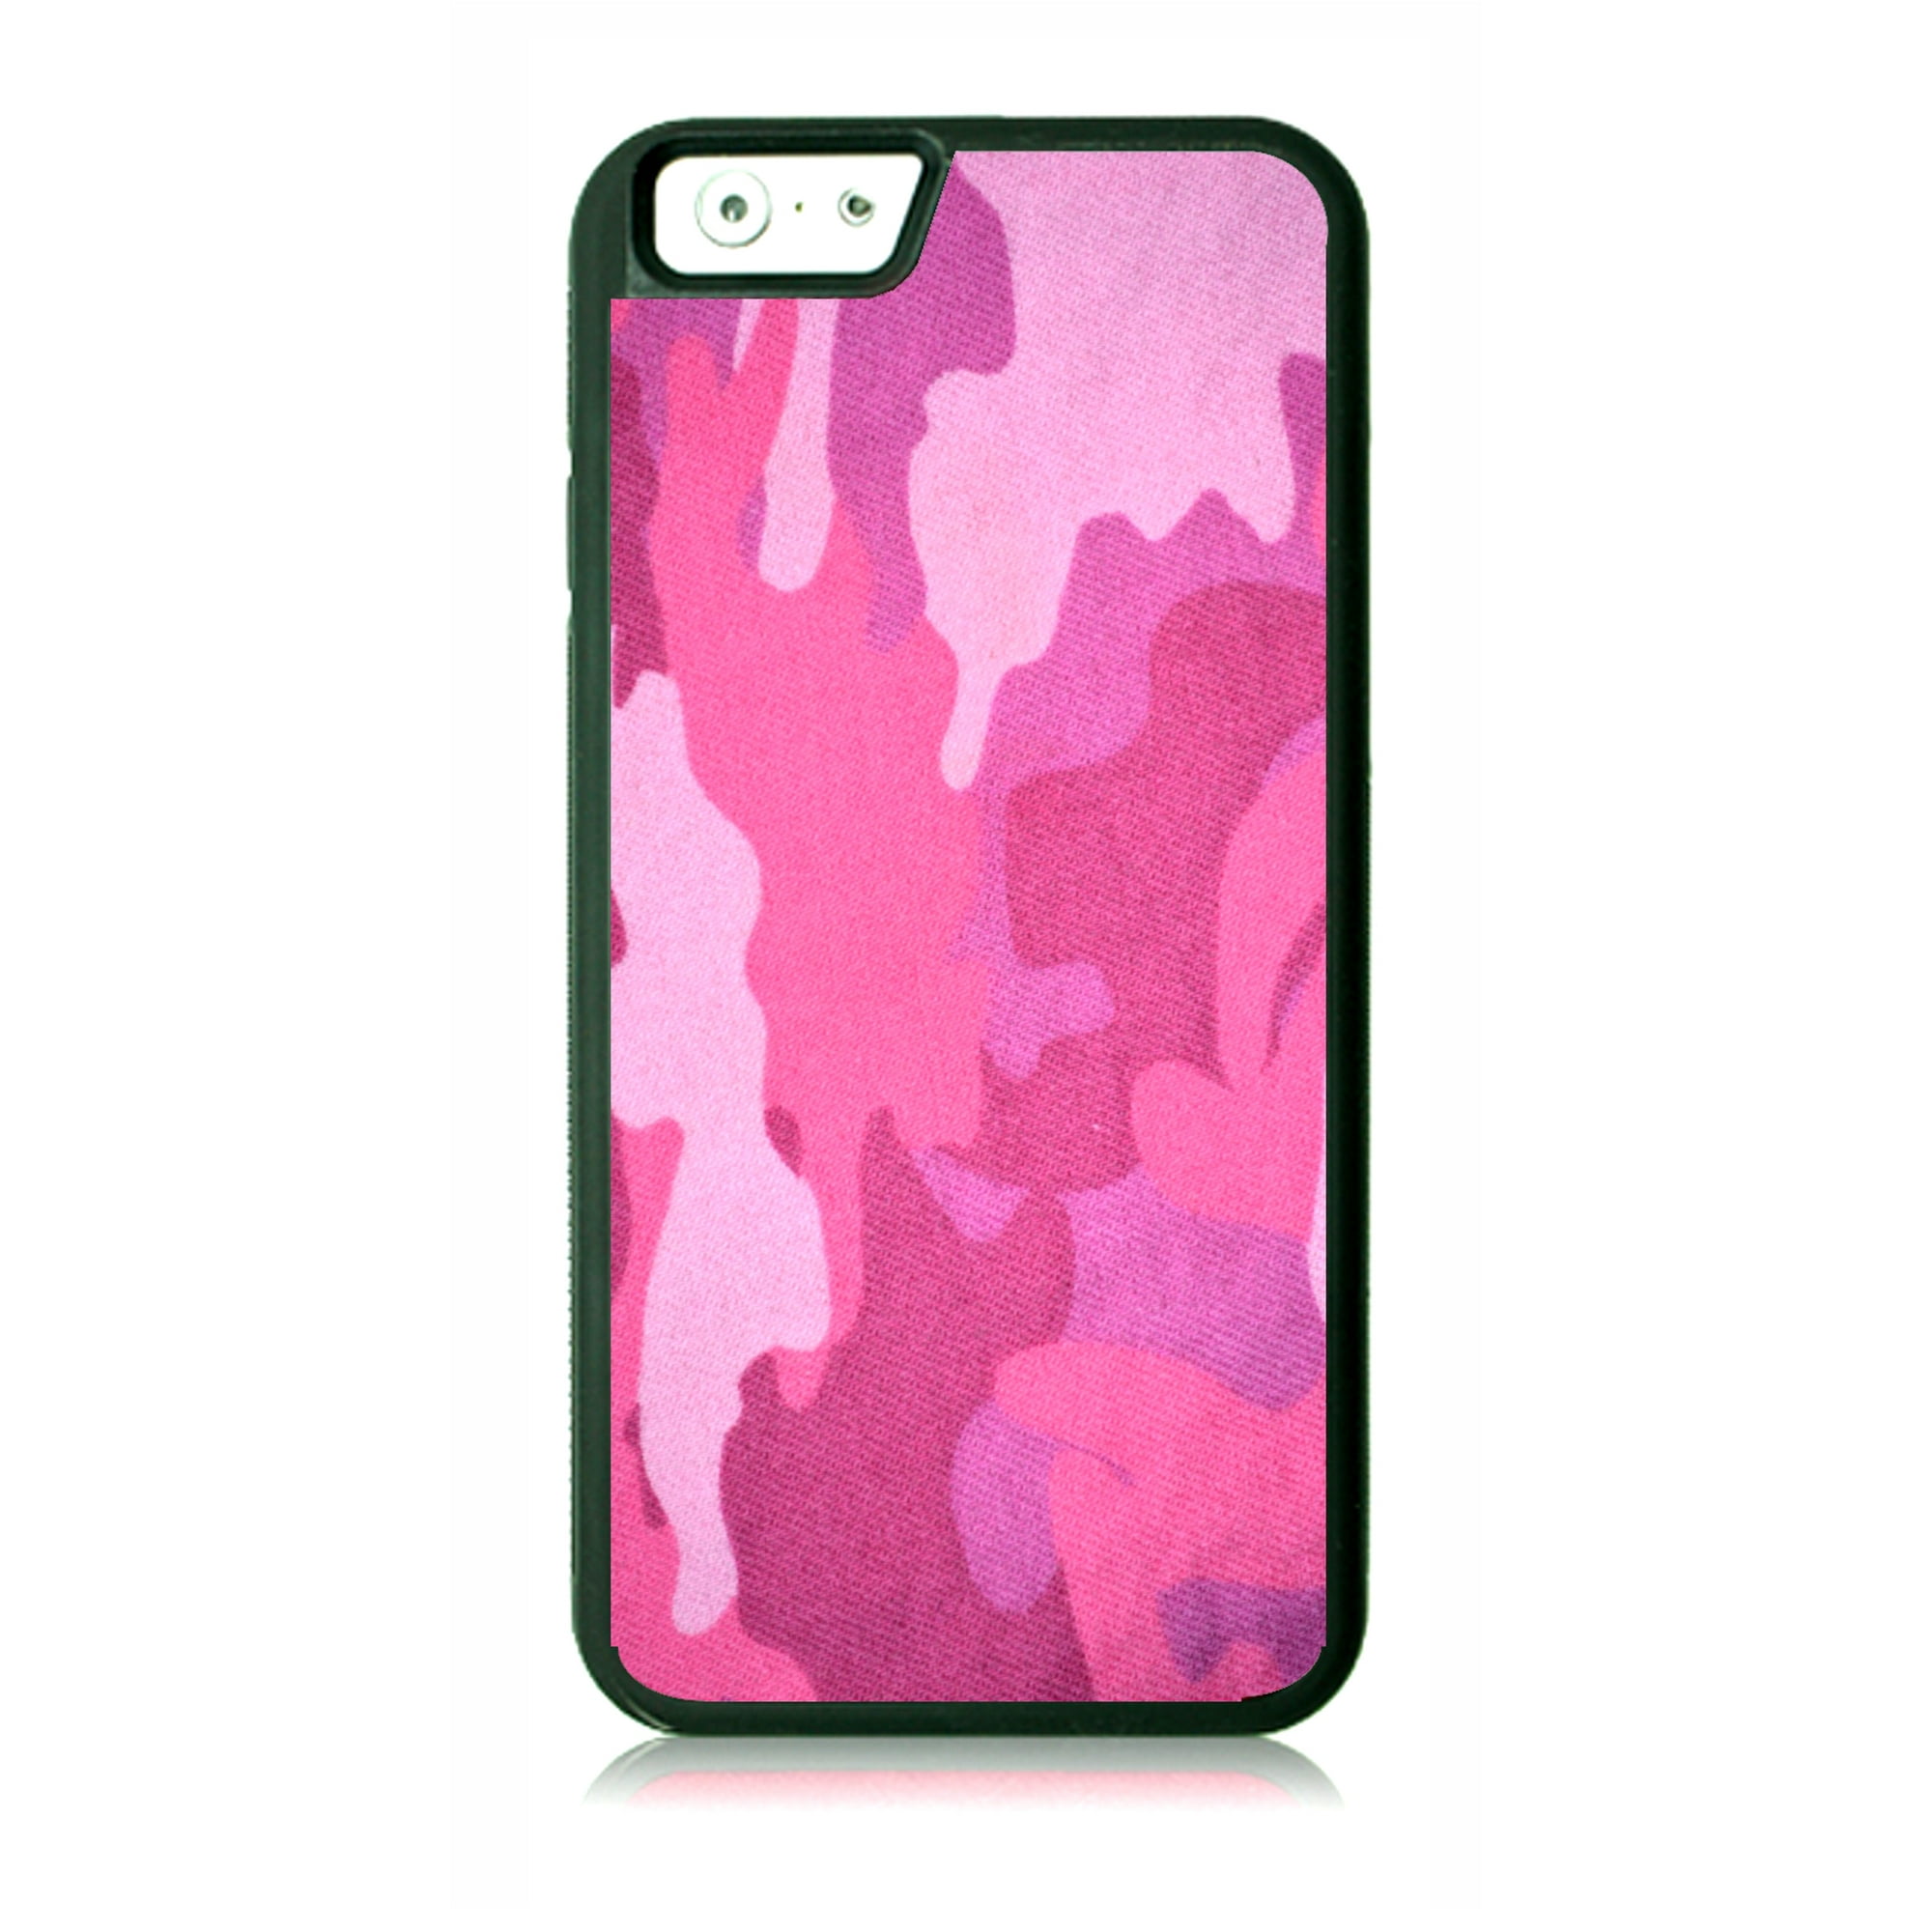 Pink Camo Camouflage Black Rubber Case the Apple iPhone 6 / iPhone 6s - iPhone Accessories iPhone 6s Accessories - Walmart.com